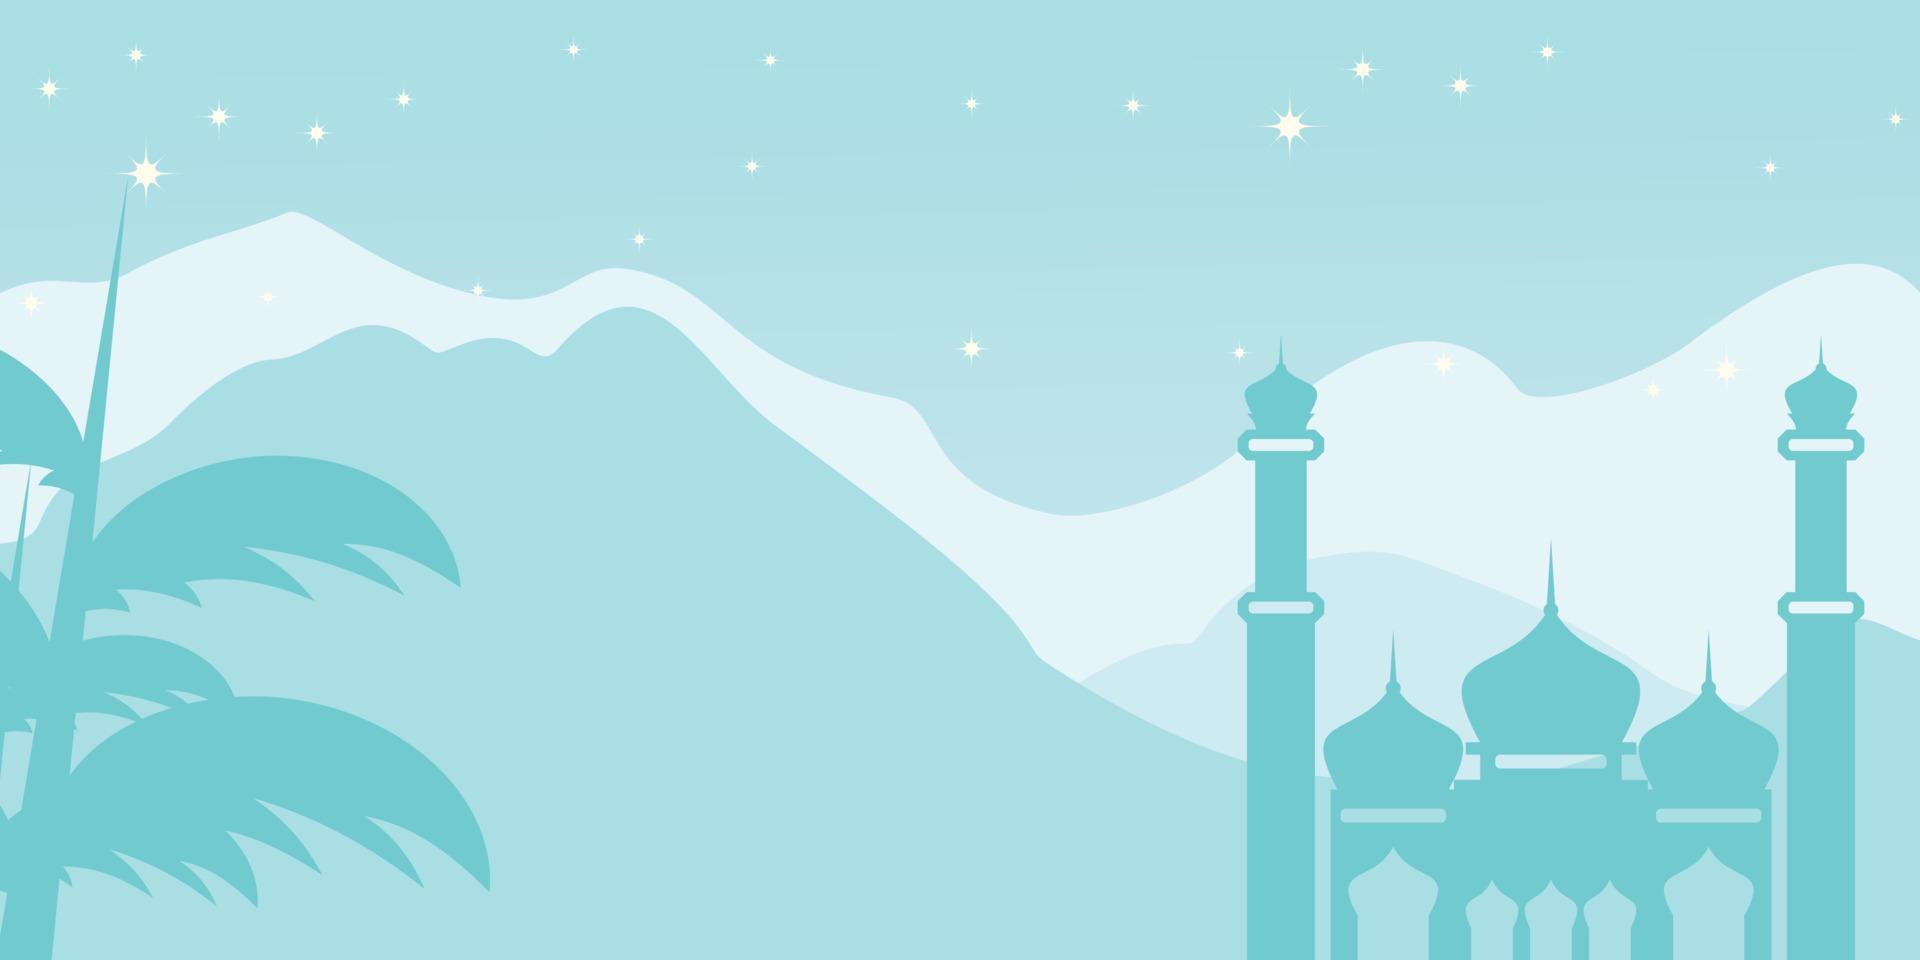 Islamic blue mountains background, with ornamented silhouette of mosque and night stars. Vector template for banners, greeting cards for Islamic holidays.